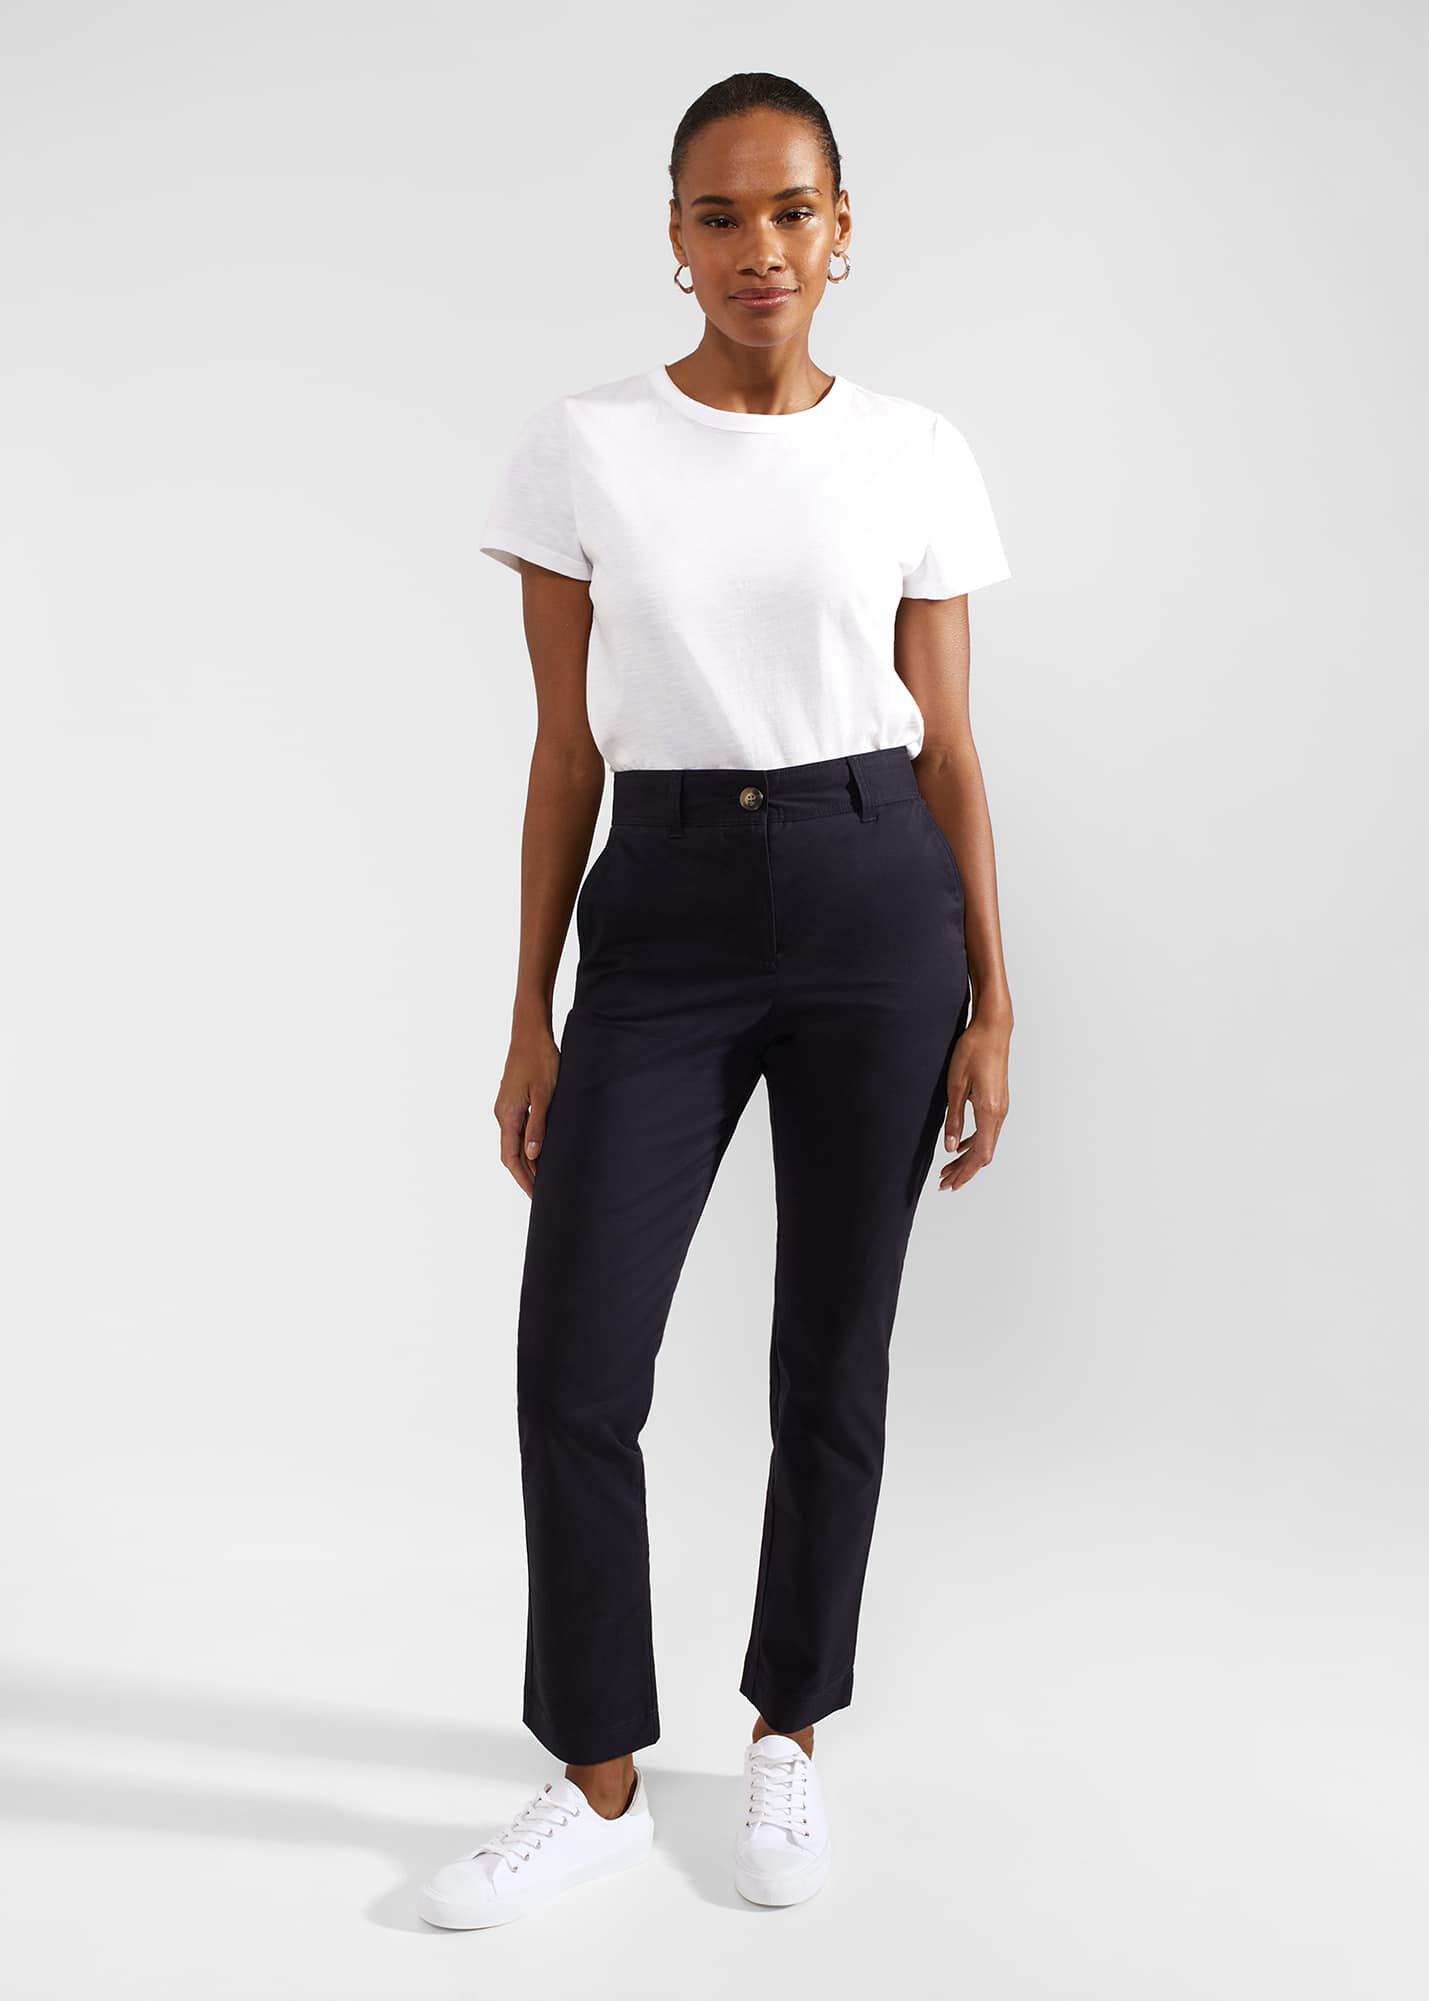 Tall Trousers | Ladies Long Length Trousers | Long Tall Sally